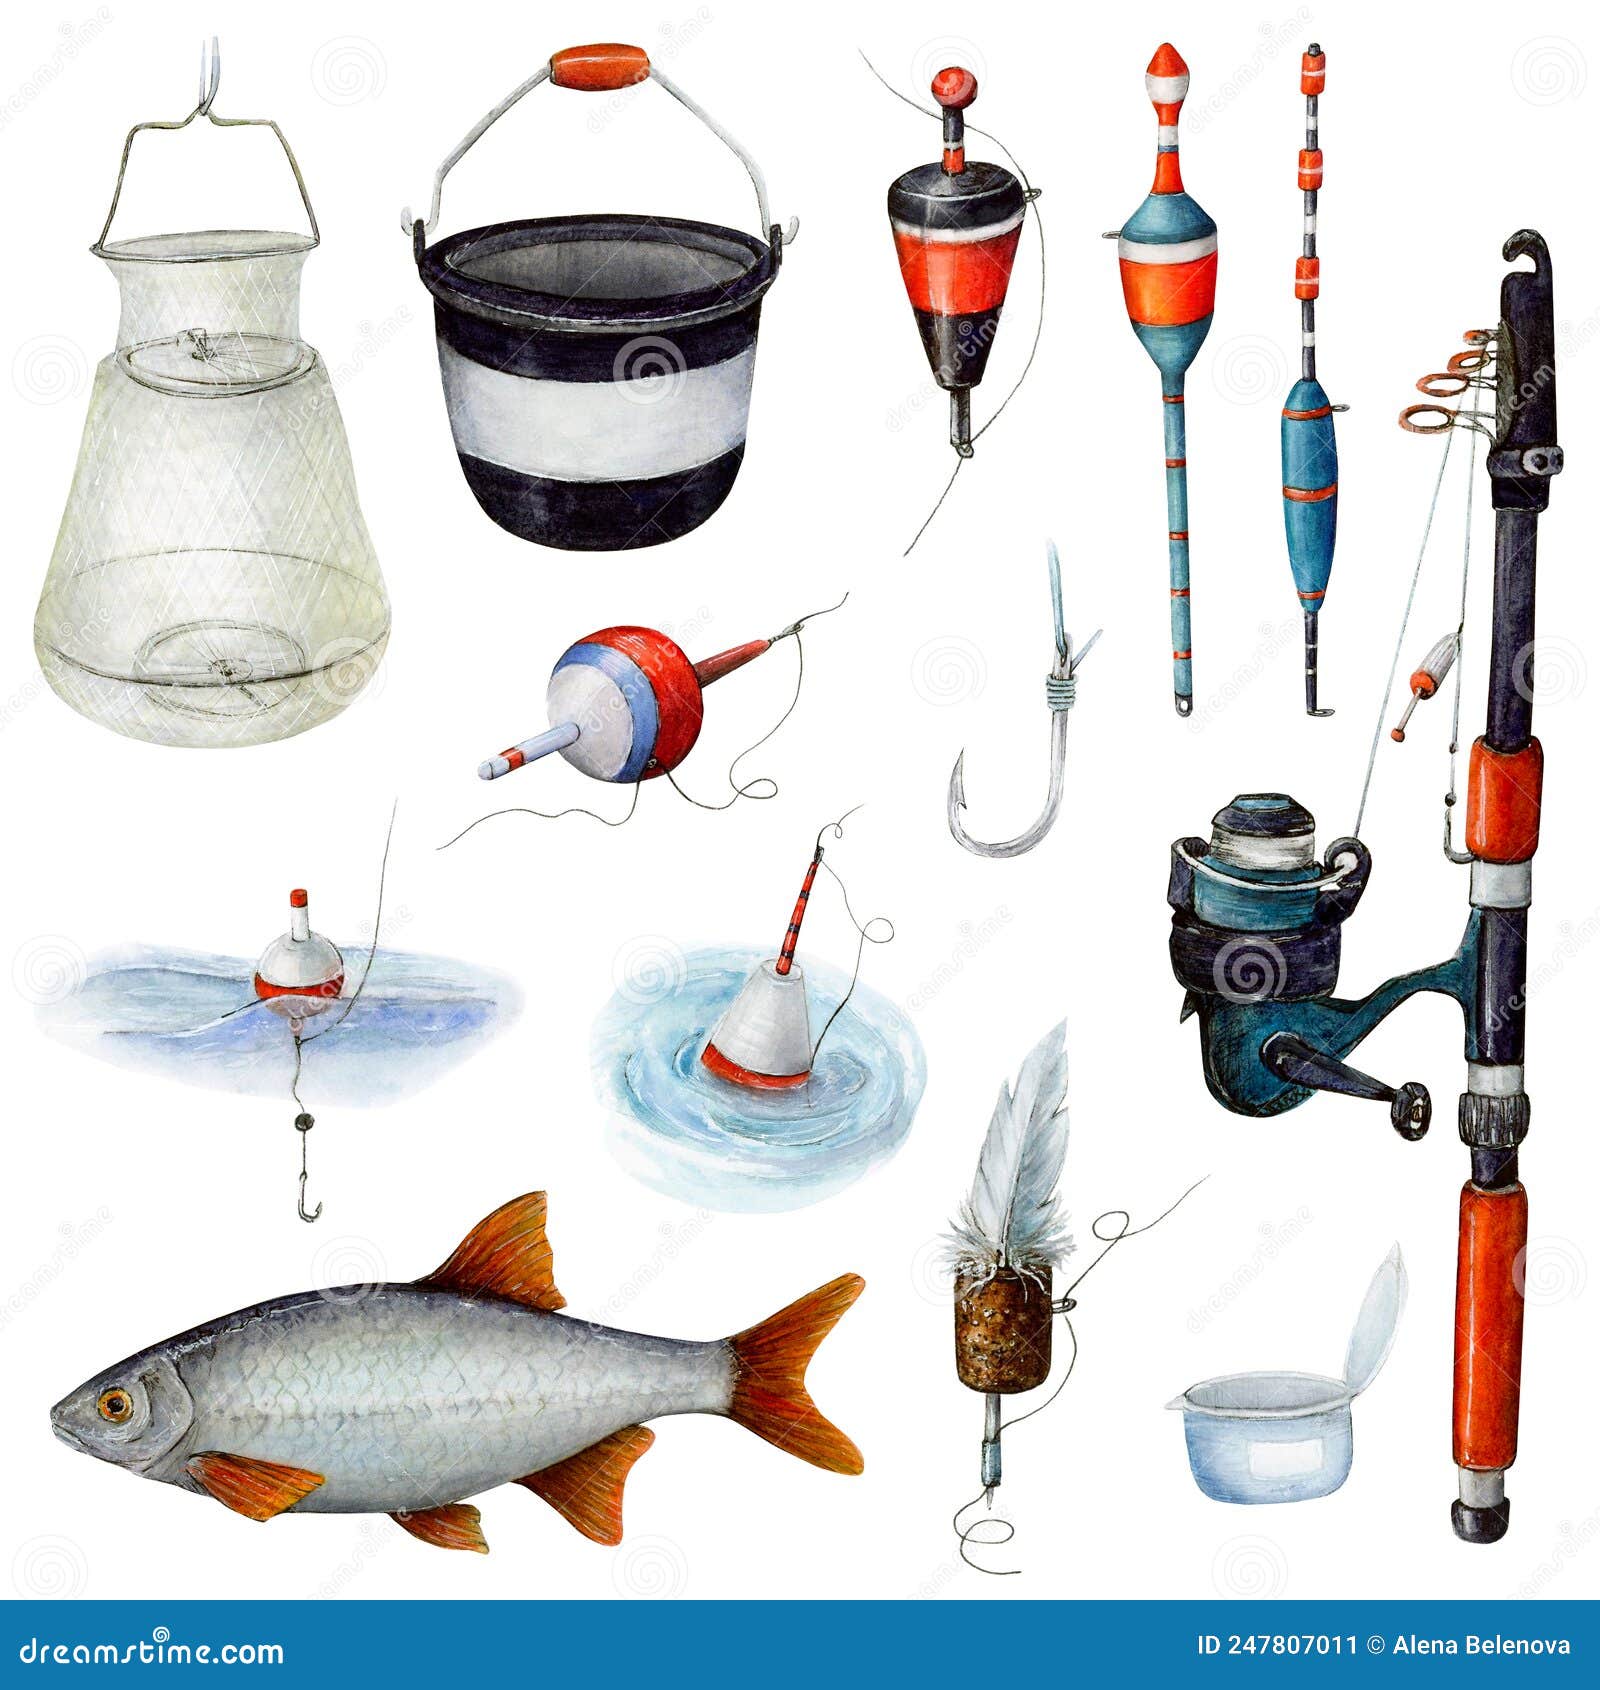 A Set of Fishing Items for Catching Fish with a Line and Hook